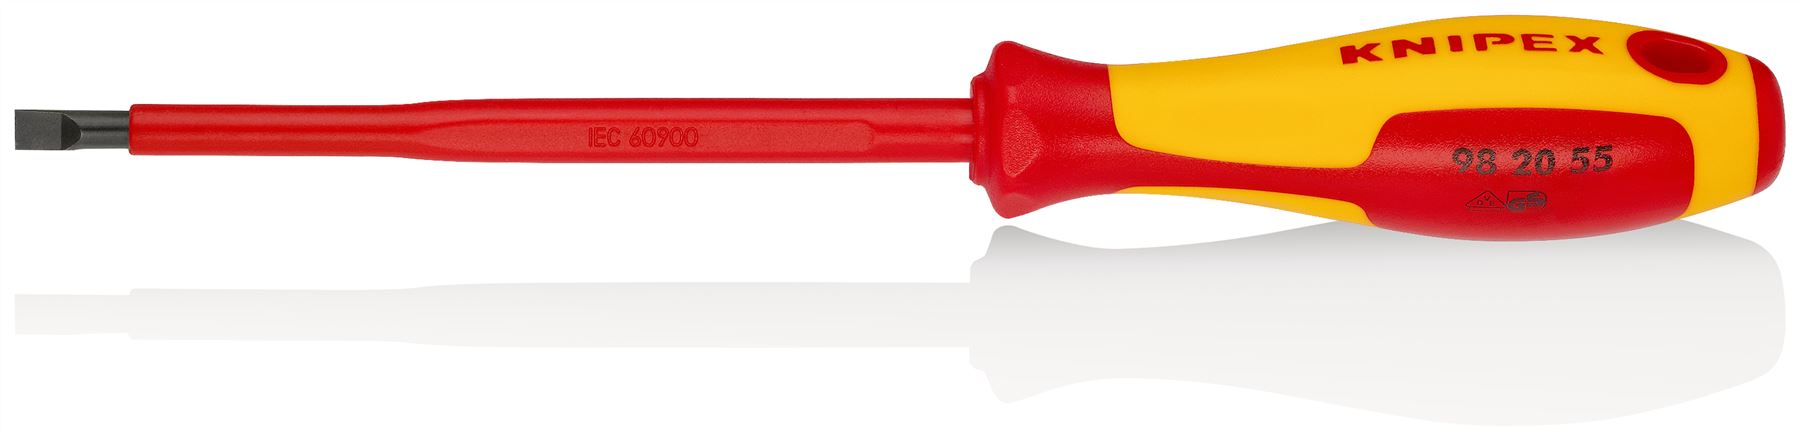 KNIPEX Screwdriver for Slotted Screws 5.5 x 1.0mm VDE Insulated Multi Component Grips 232mm 98 20 55